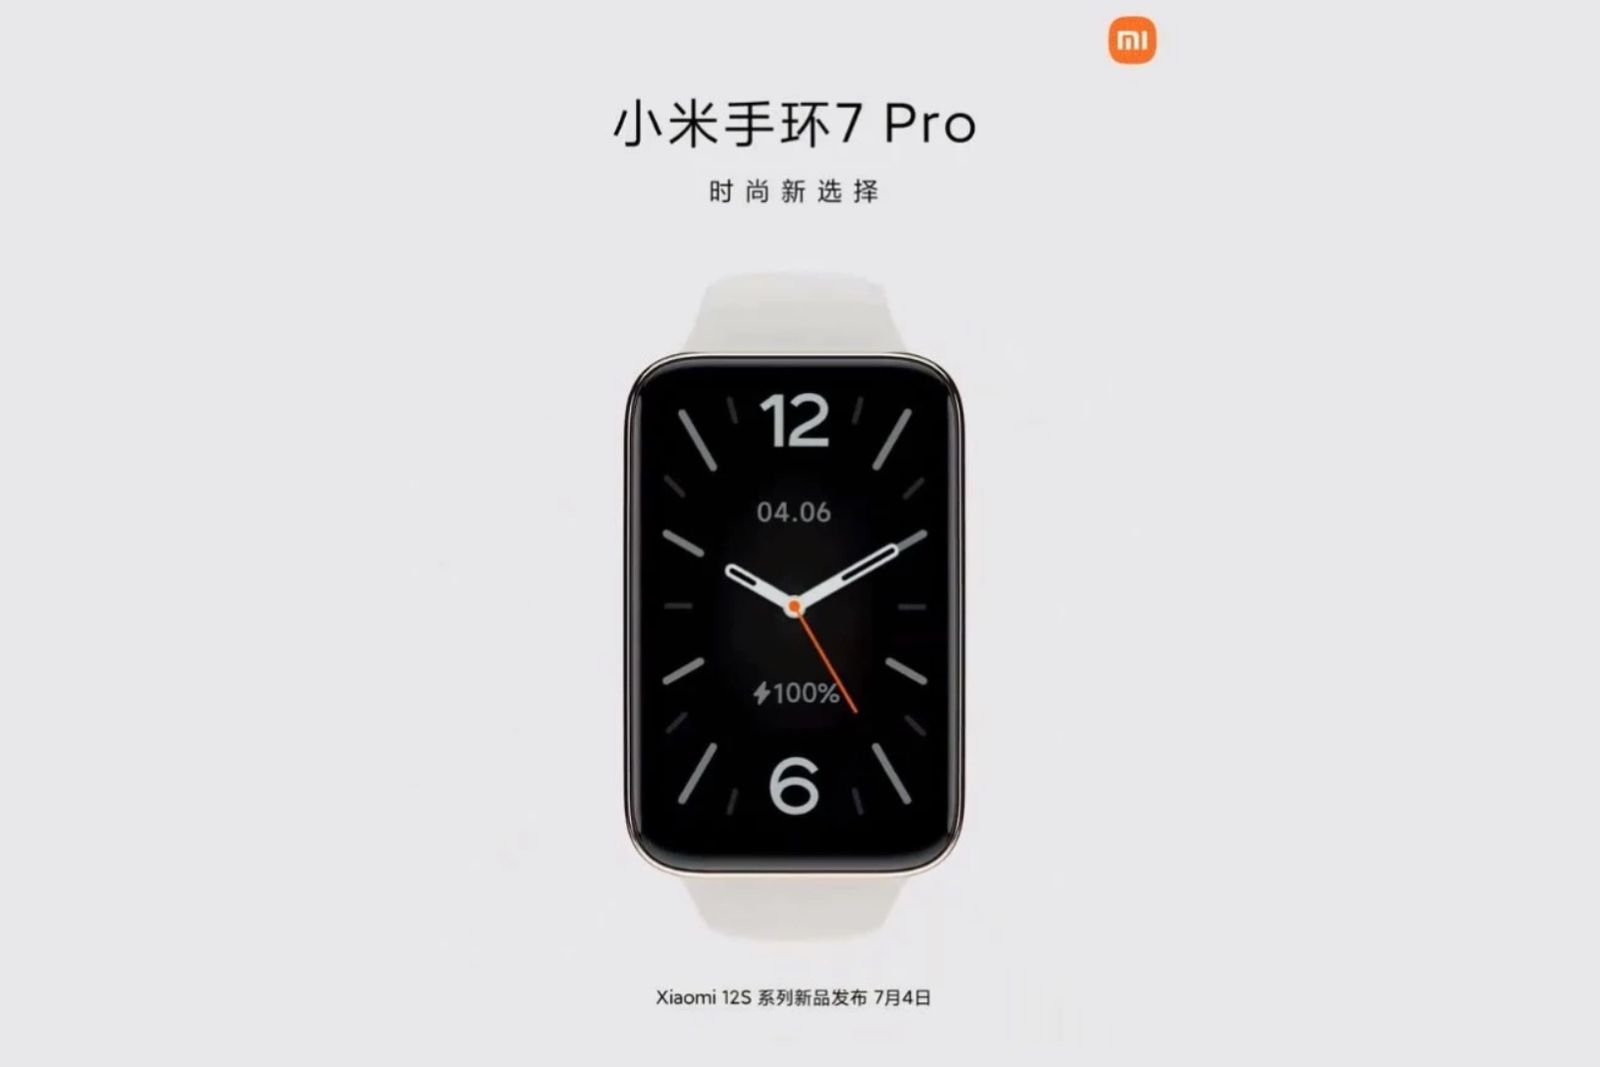 Xiaomi Mi Band 7 Pro teased ahead of official announcement photo 1